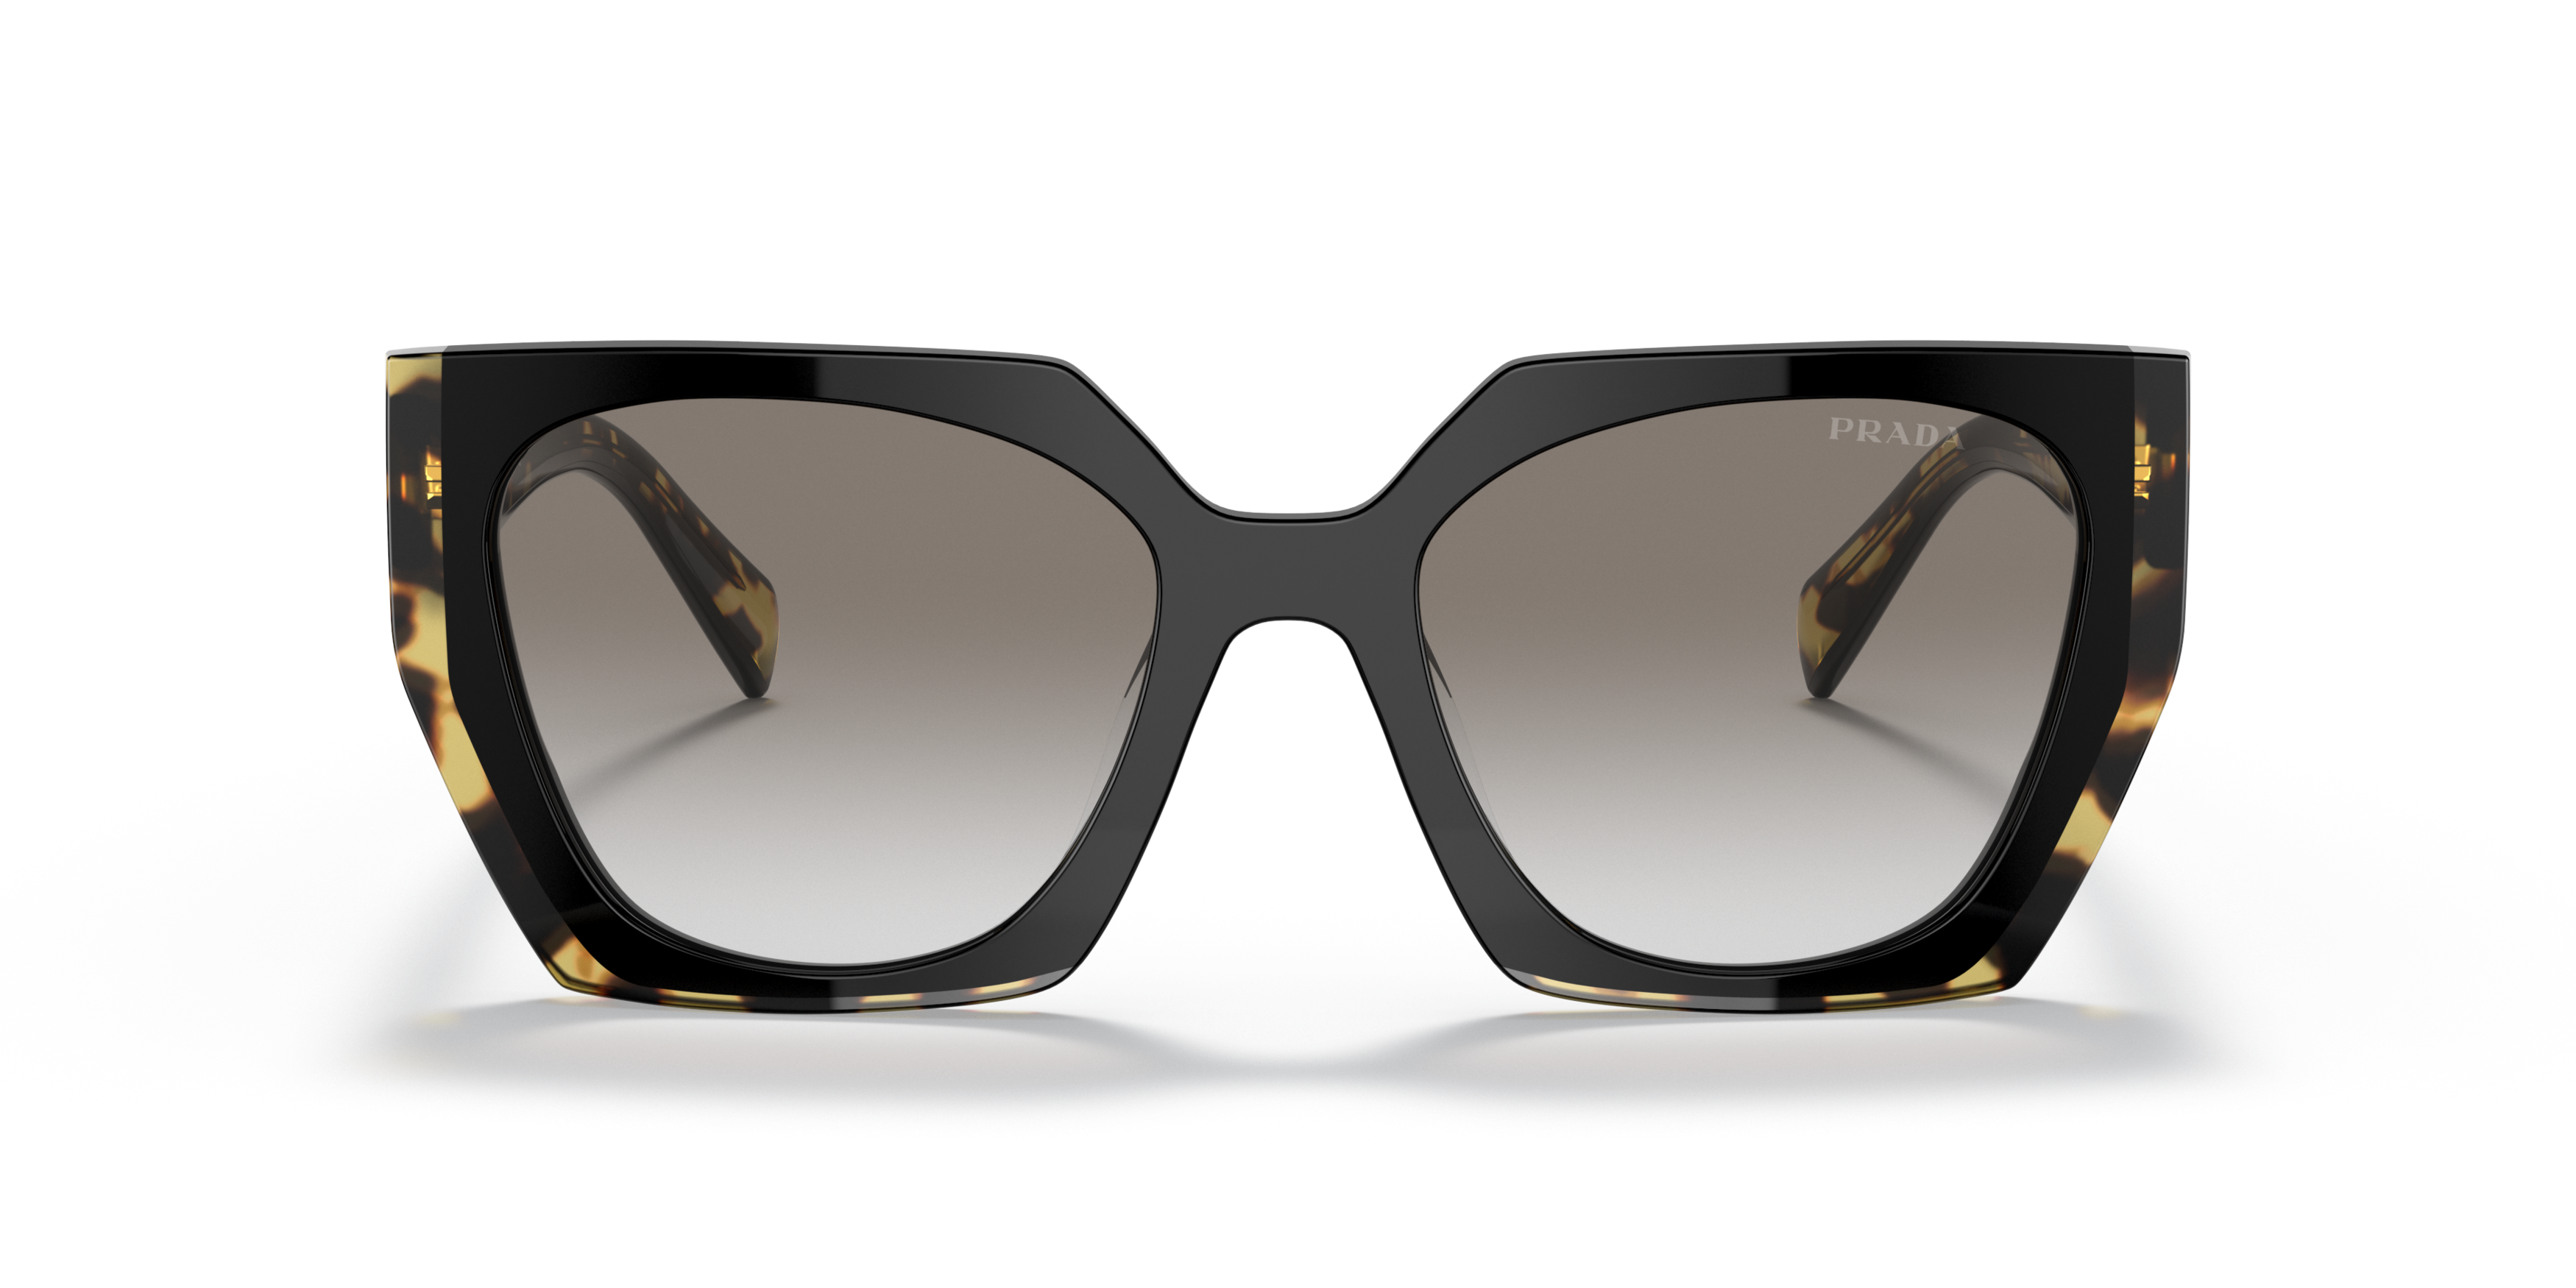 [products.image.front] PRADA PR 15WS 3890A7